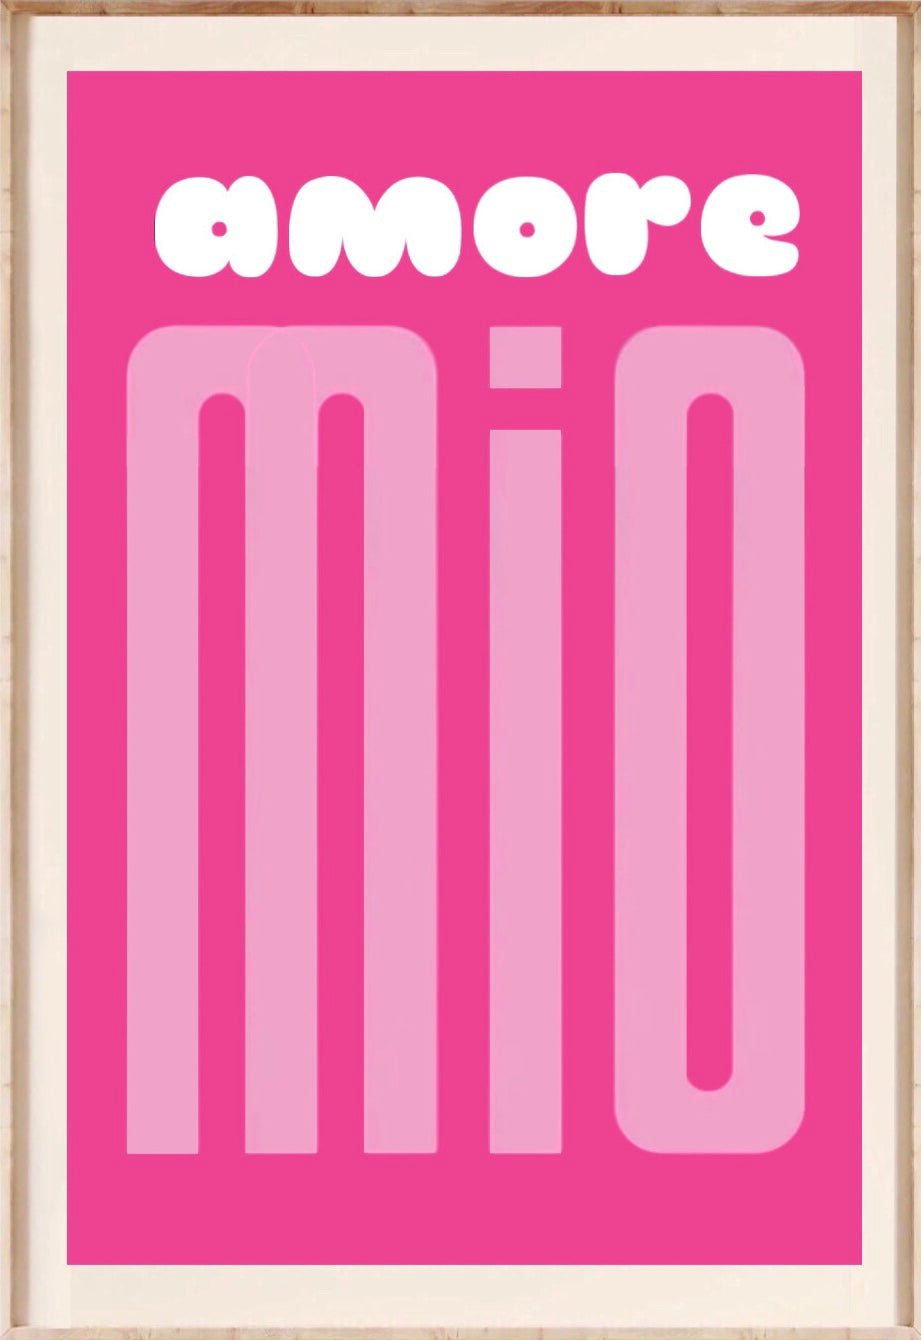 " amore mio " poster